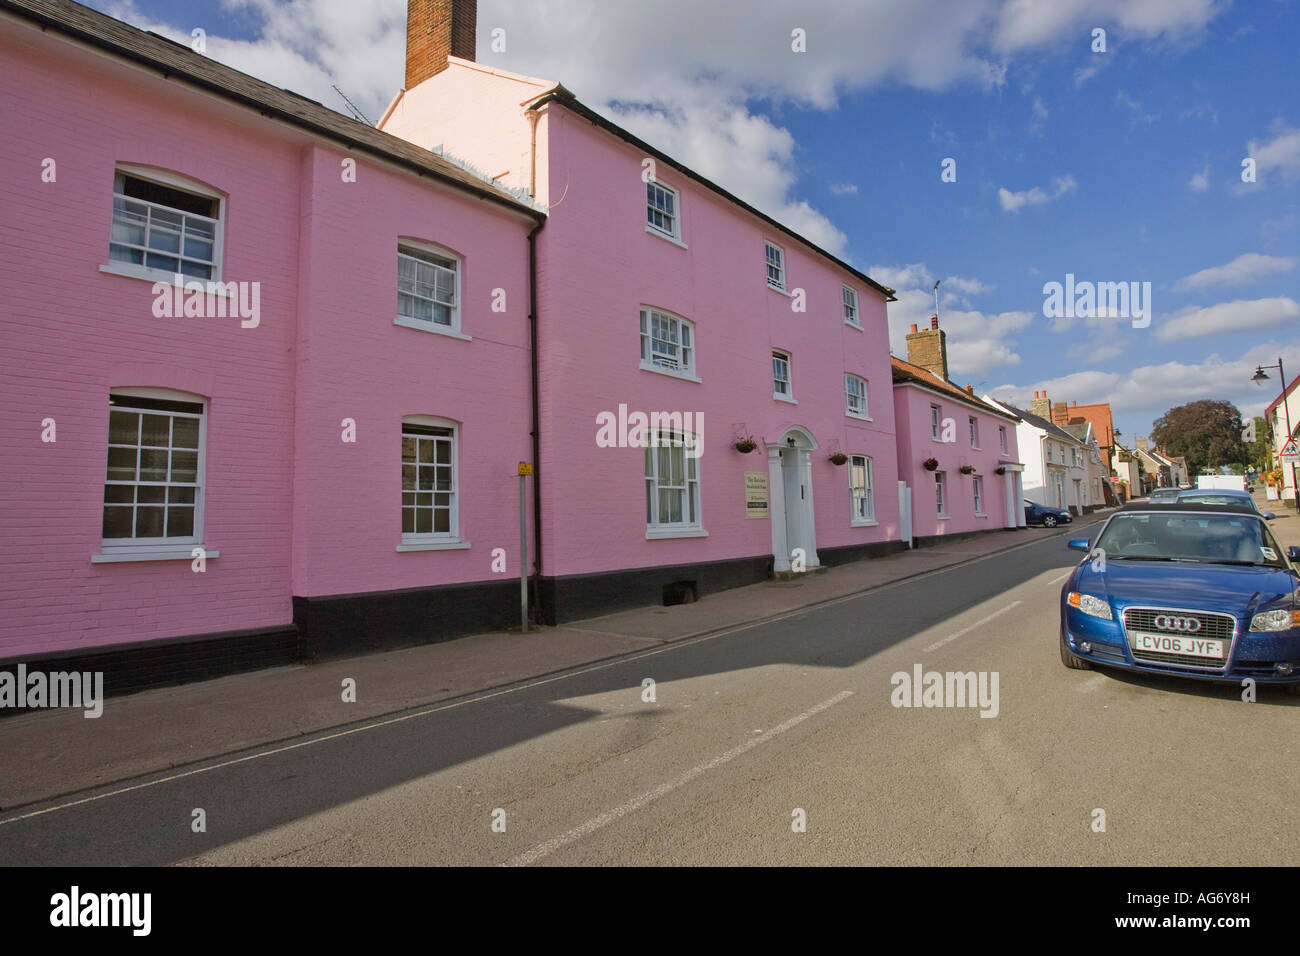 Ixworth village high street in Suffolk showing traditional pink painted houses, 2007 Stock Photo